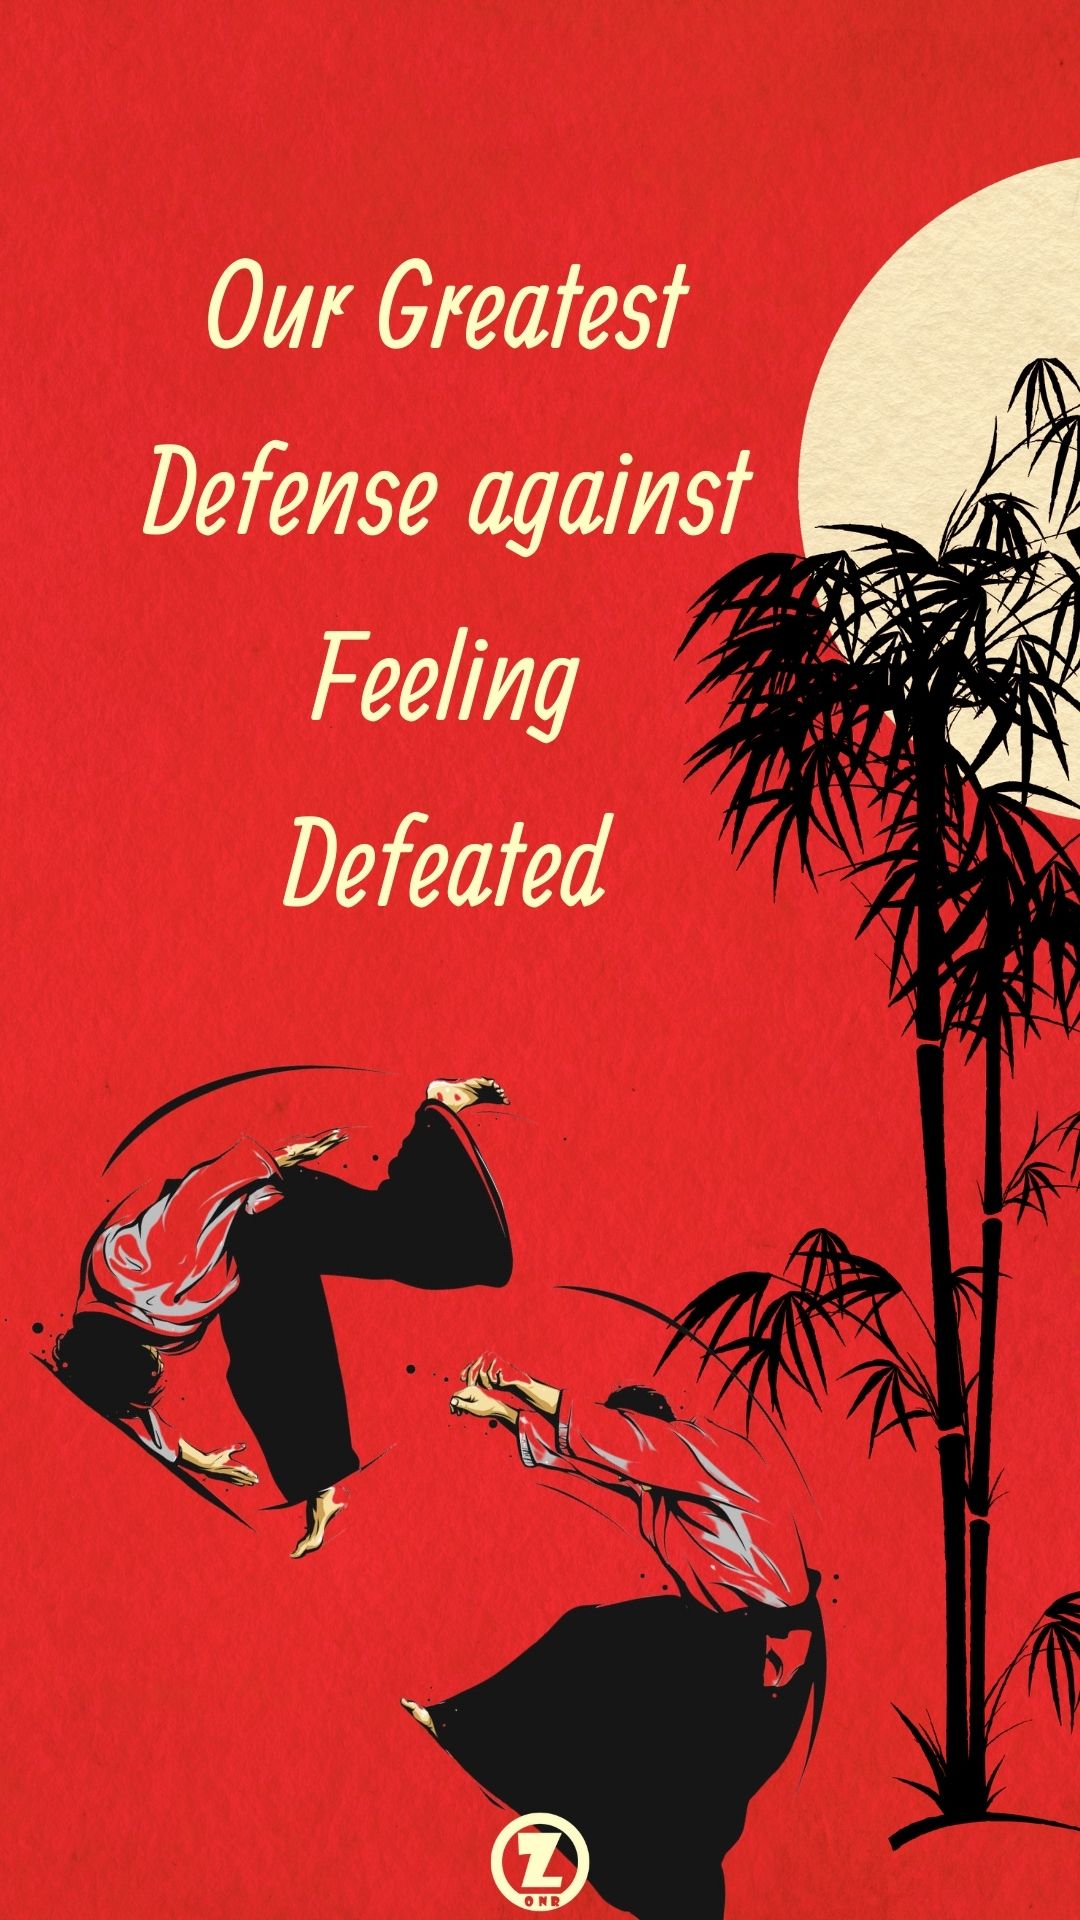 You are currently viewing “The Art of Peace” A Defense against Feeling Defeated – Step 1